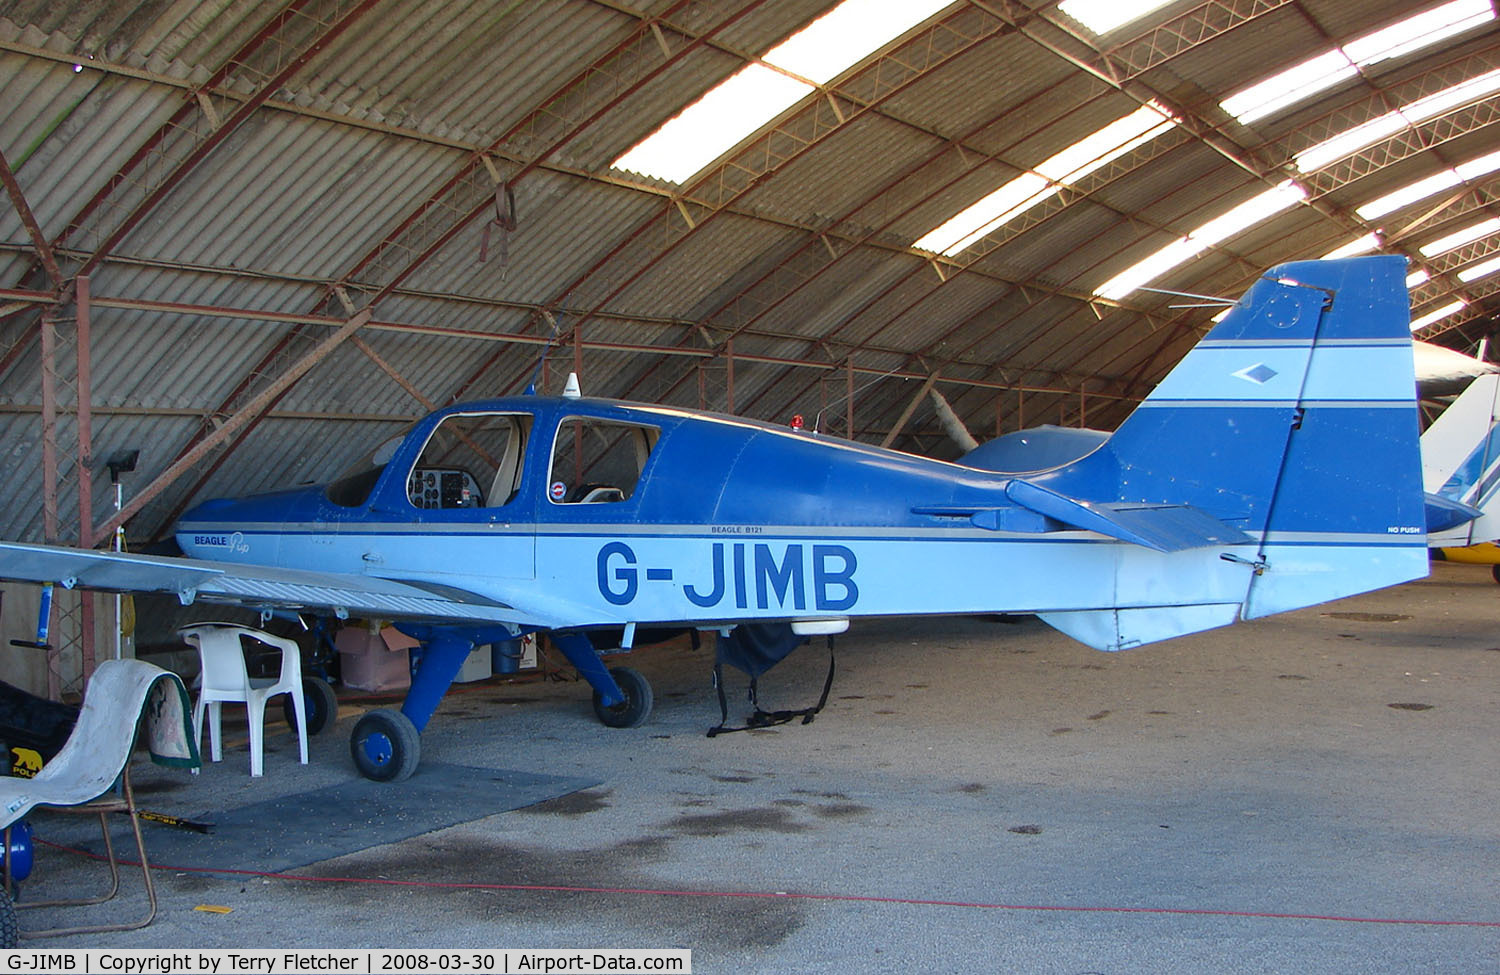 G-JIMB, 1969 Beagle B-121 Pup Series 1 (Pup 100) C/N B121-033, One aircraft at the friendly Enstone Airfield in Oxfordshire